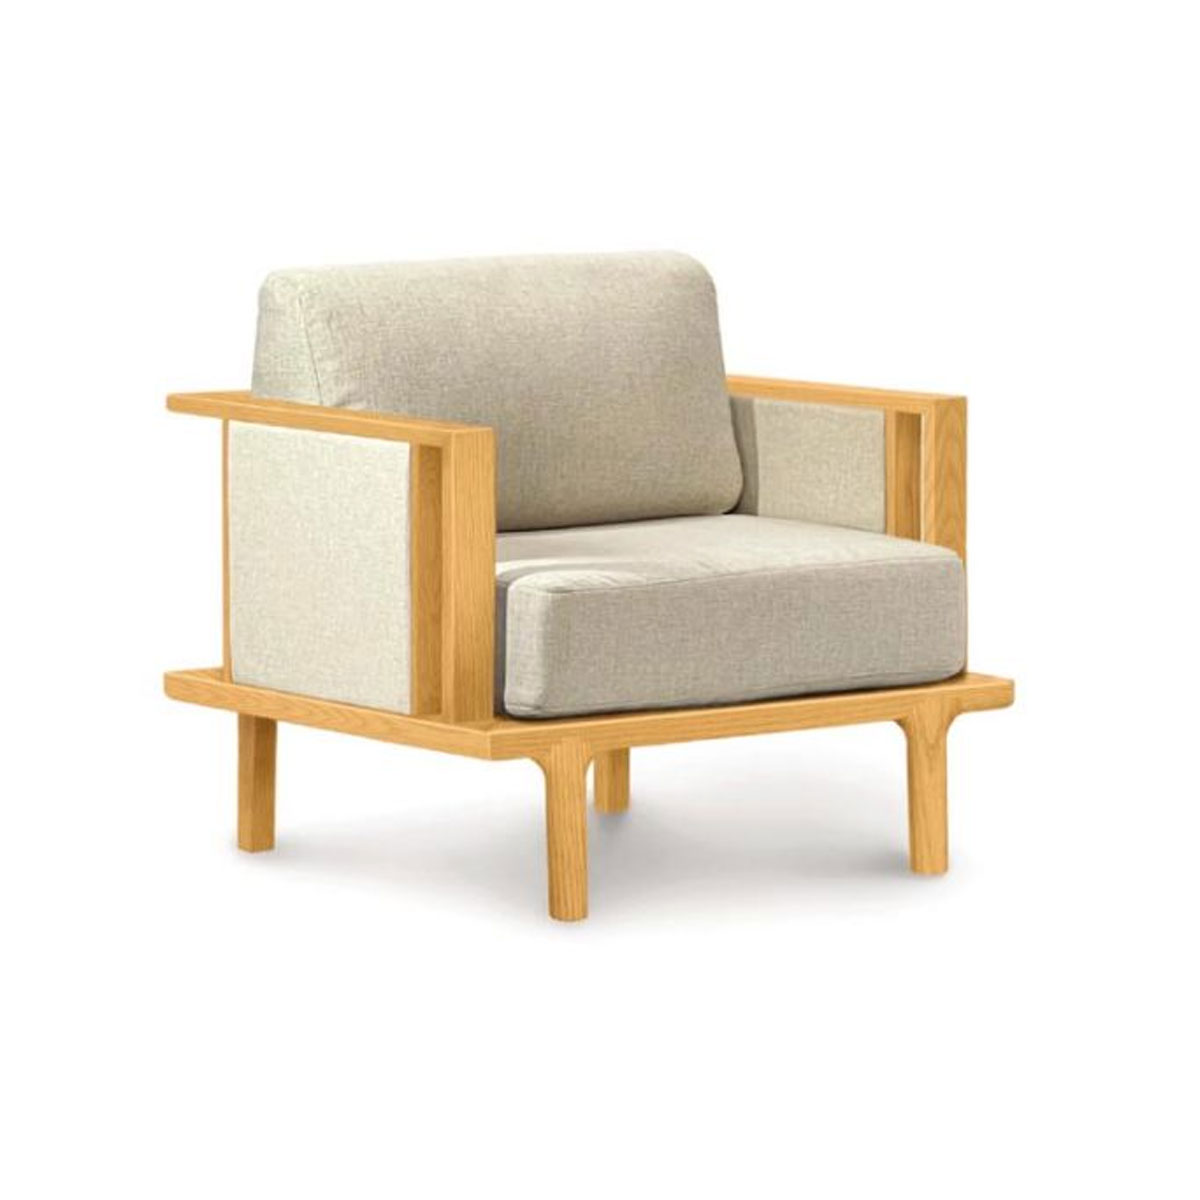 Copeland Sierra Chair with Upholstered Panels in Cherry